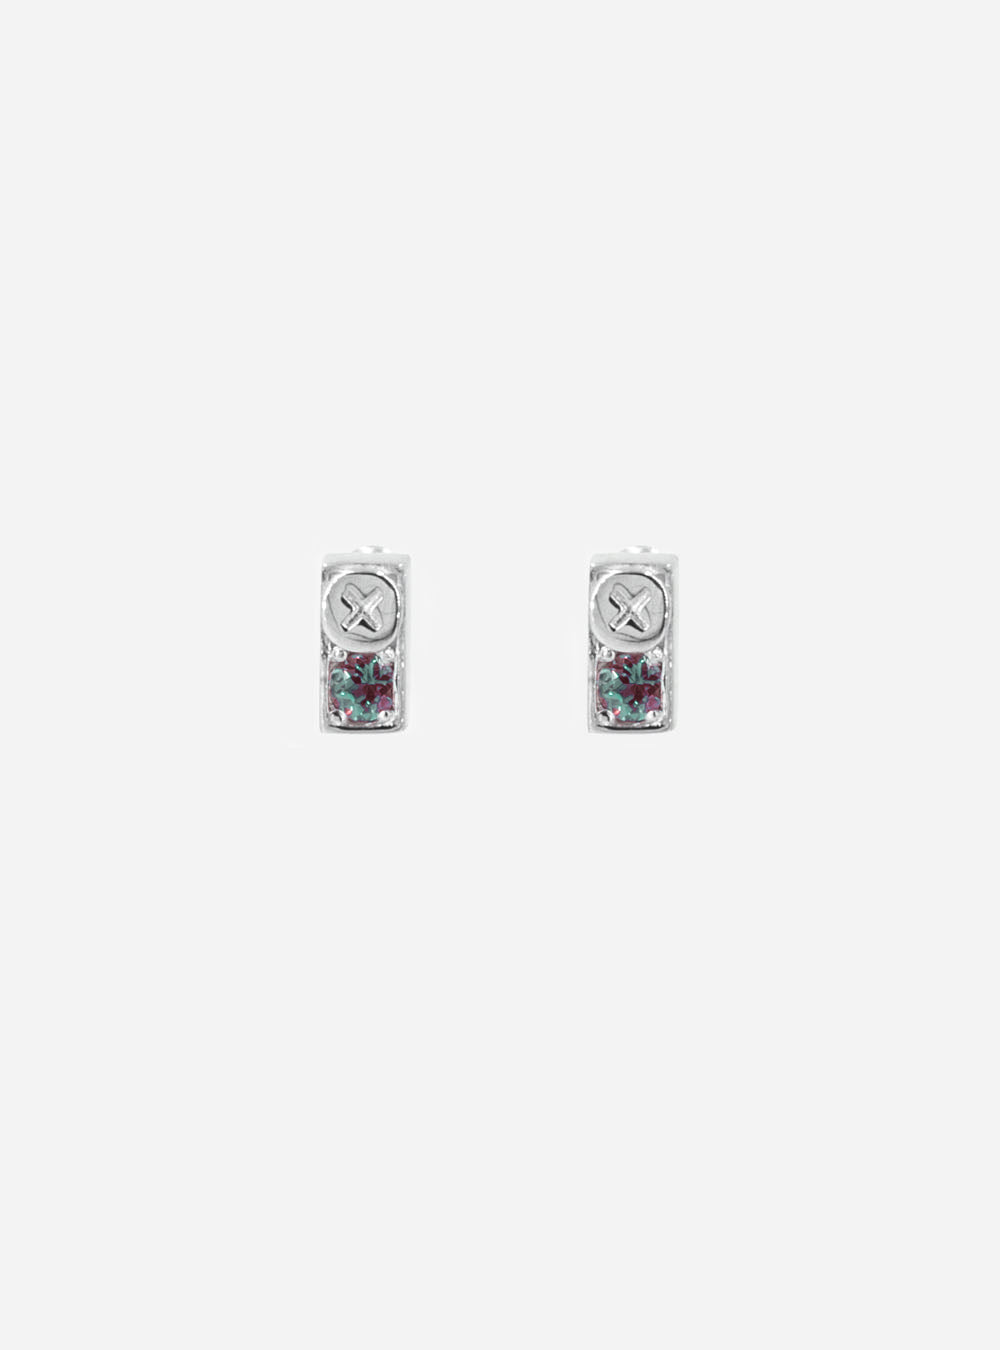 A pair of MIDNIGHTFACTORY Screwbox colour-changing alexandrite earrings on a white background.